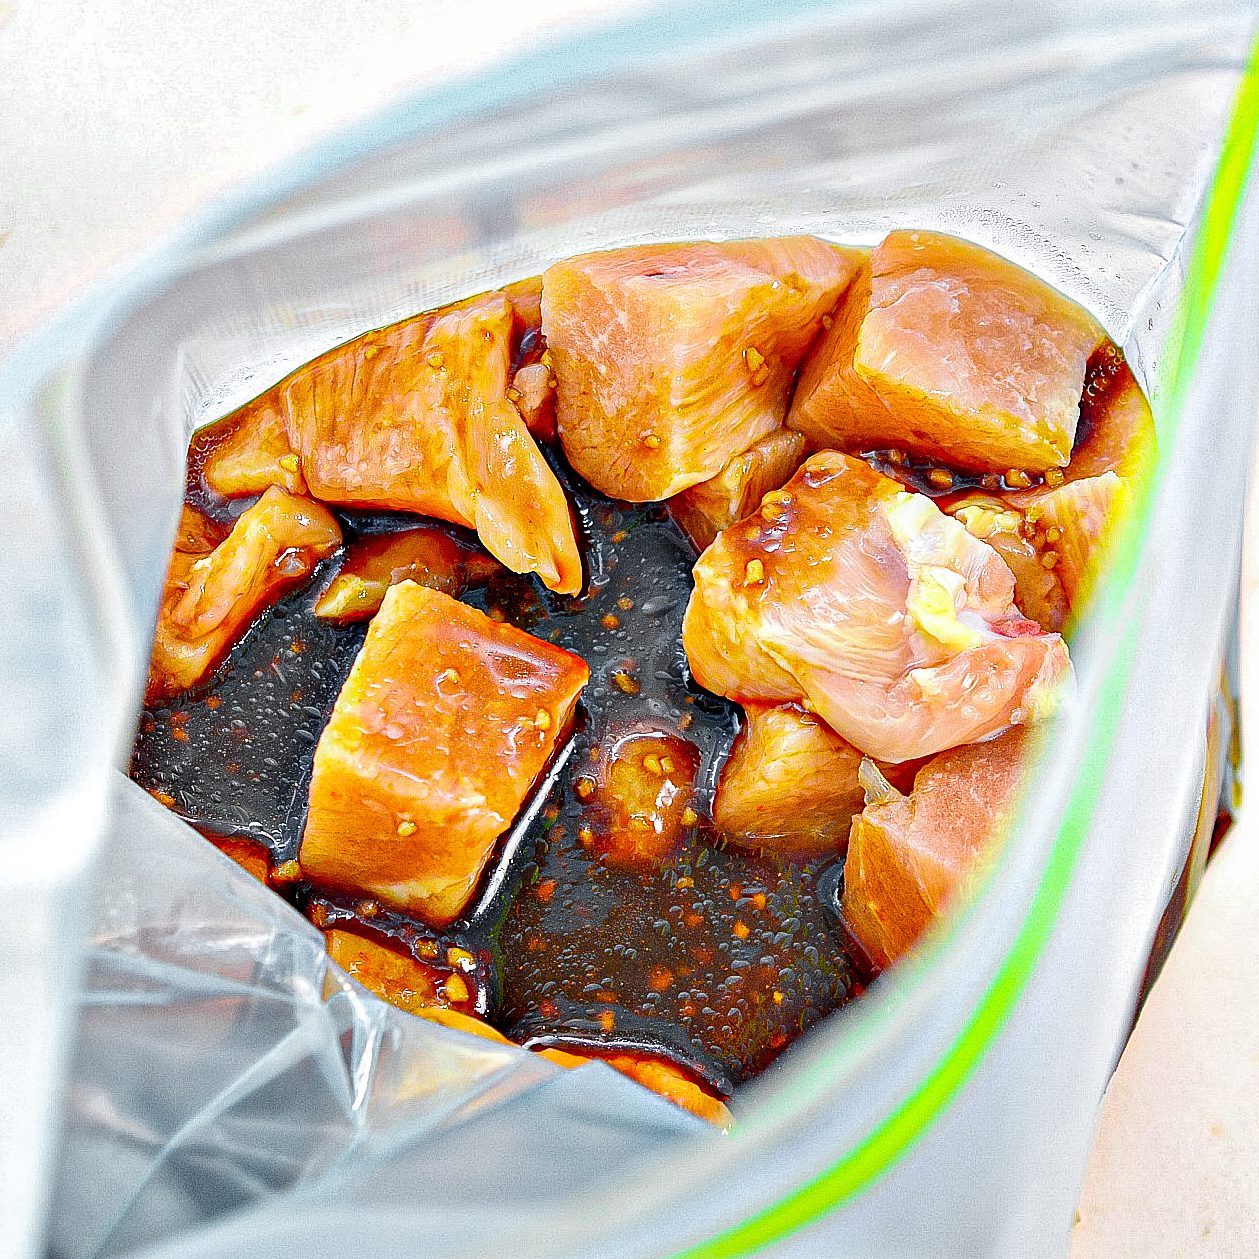 Place the cut-up chicken into a Ziploc bag, and pour the sauce mixture over it. 